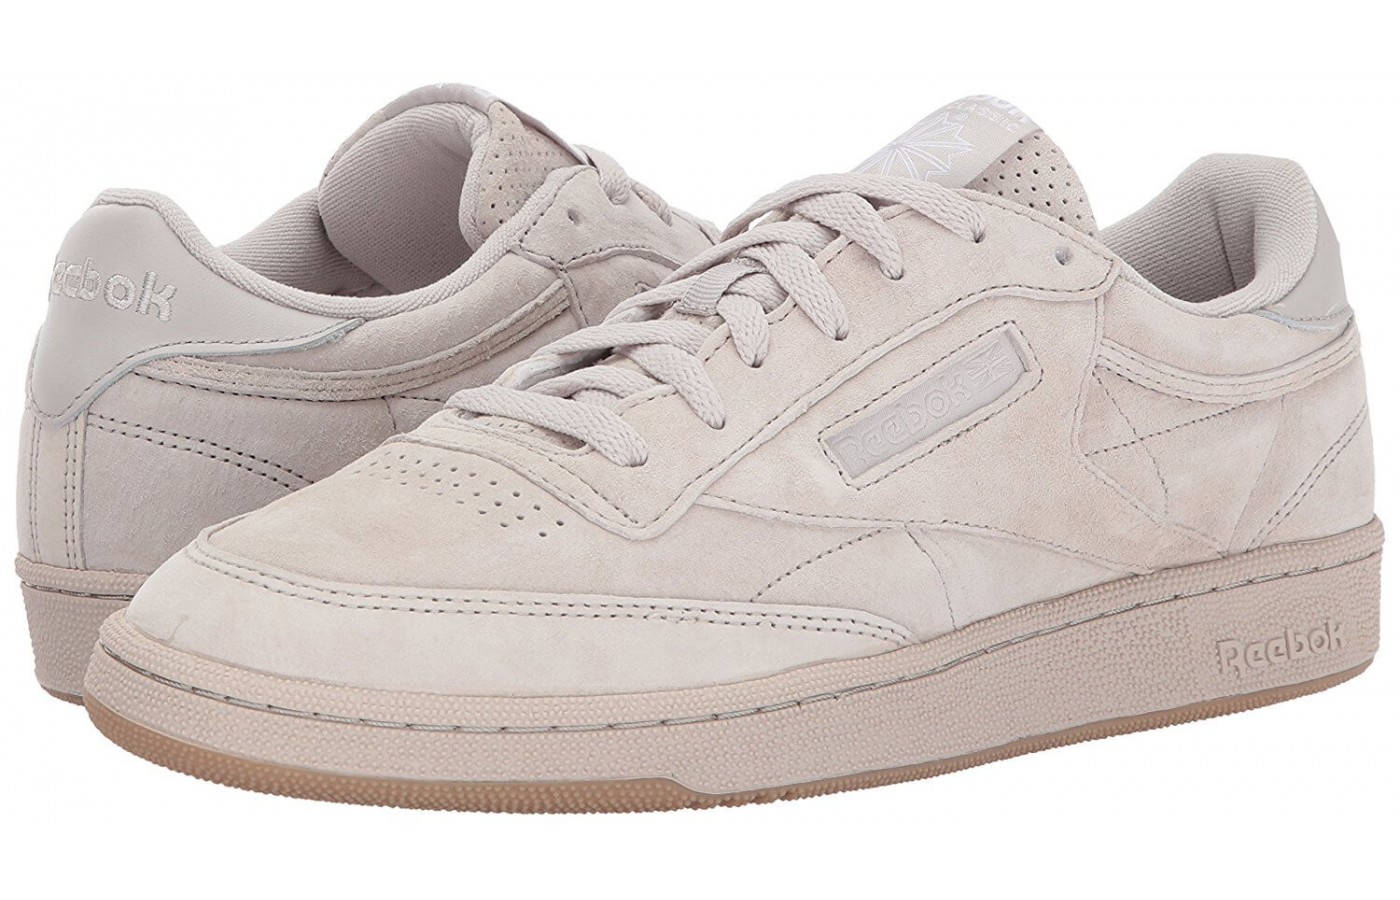 The Reebok Club C 85 has a leather upper